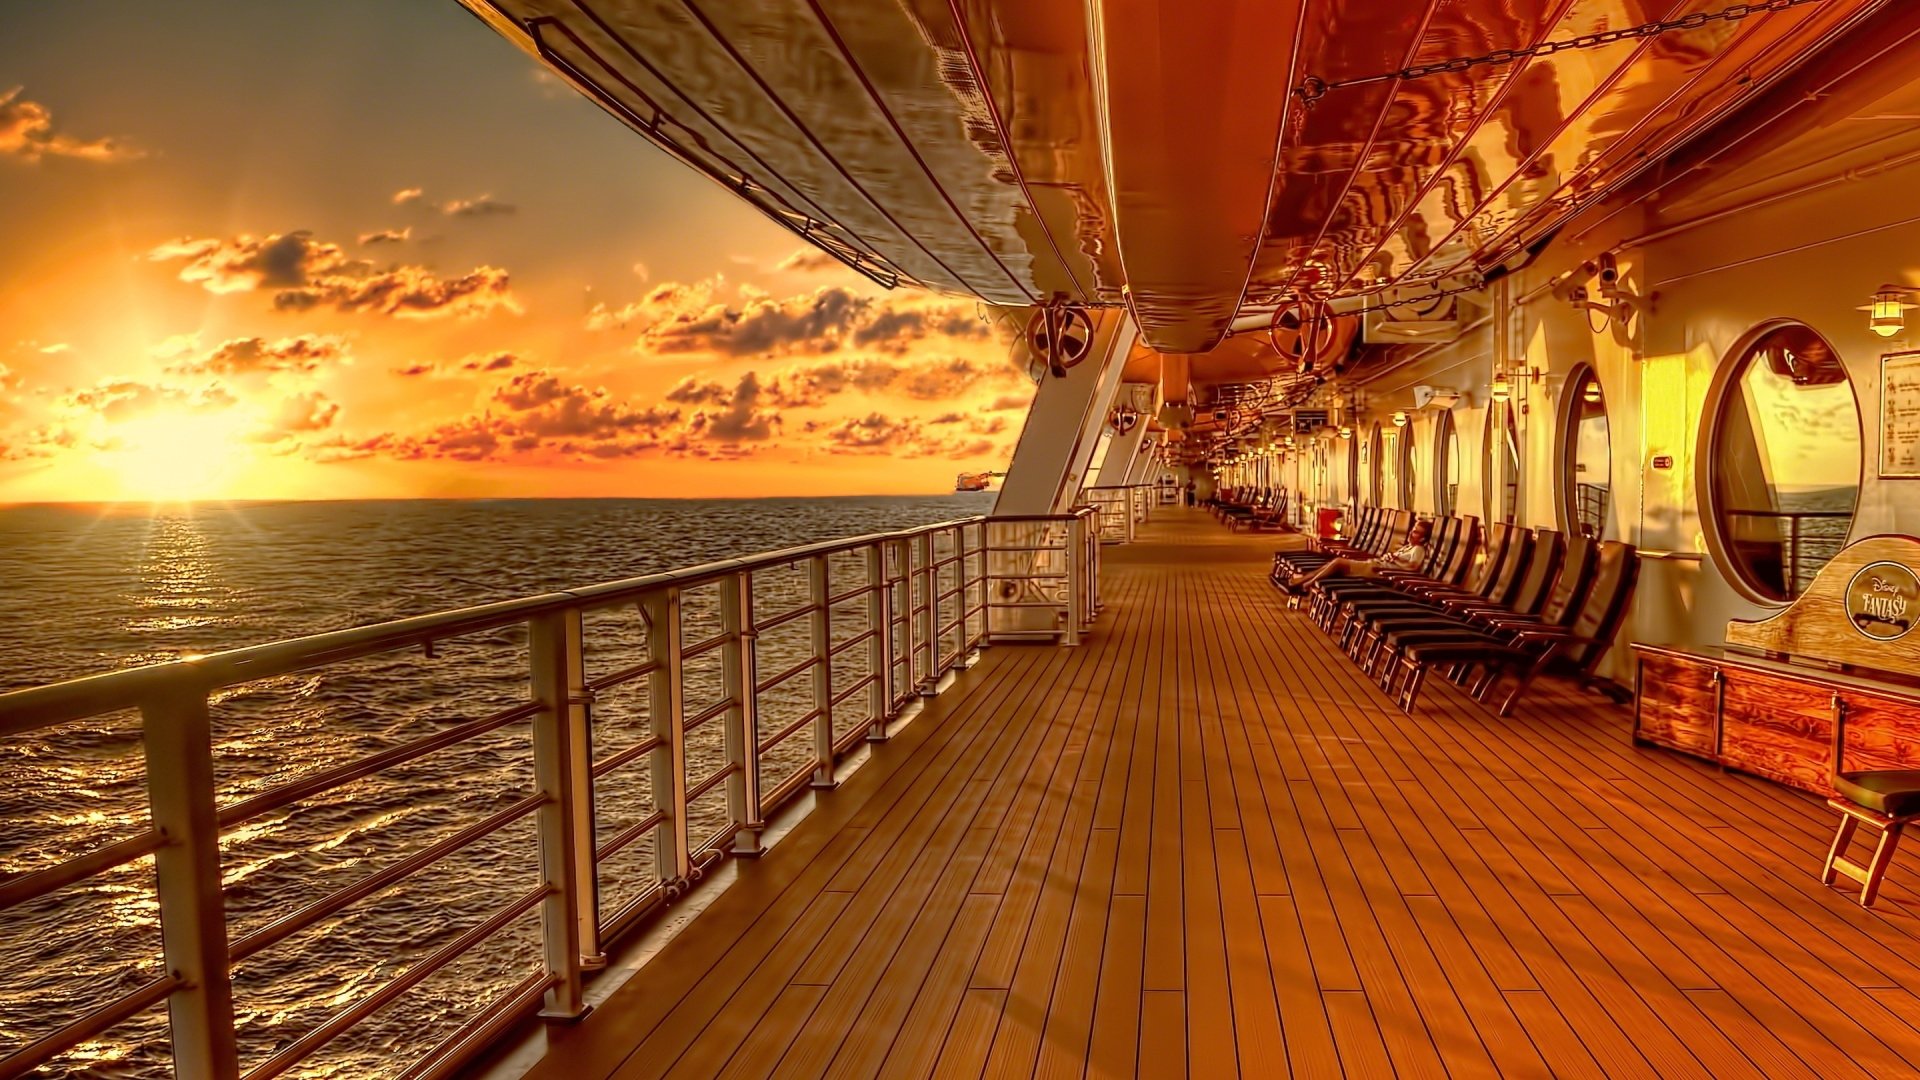 Of The Sunset From Disney Fantasy Oceanliner Deck HD